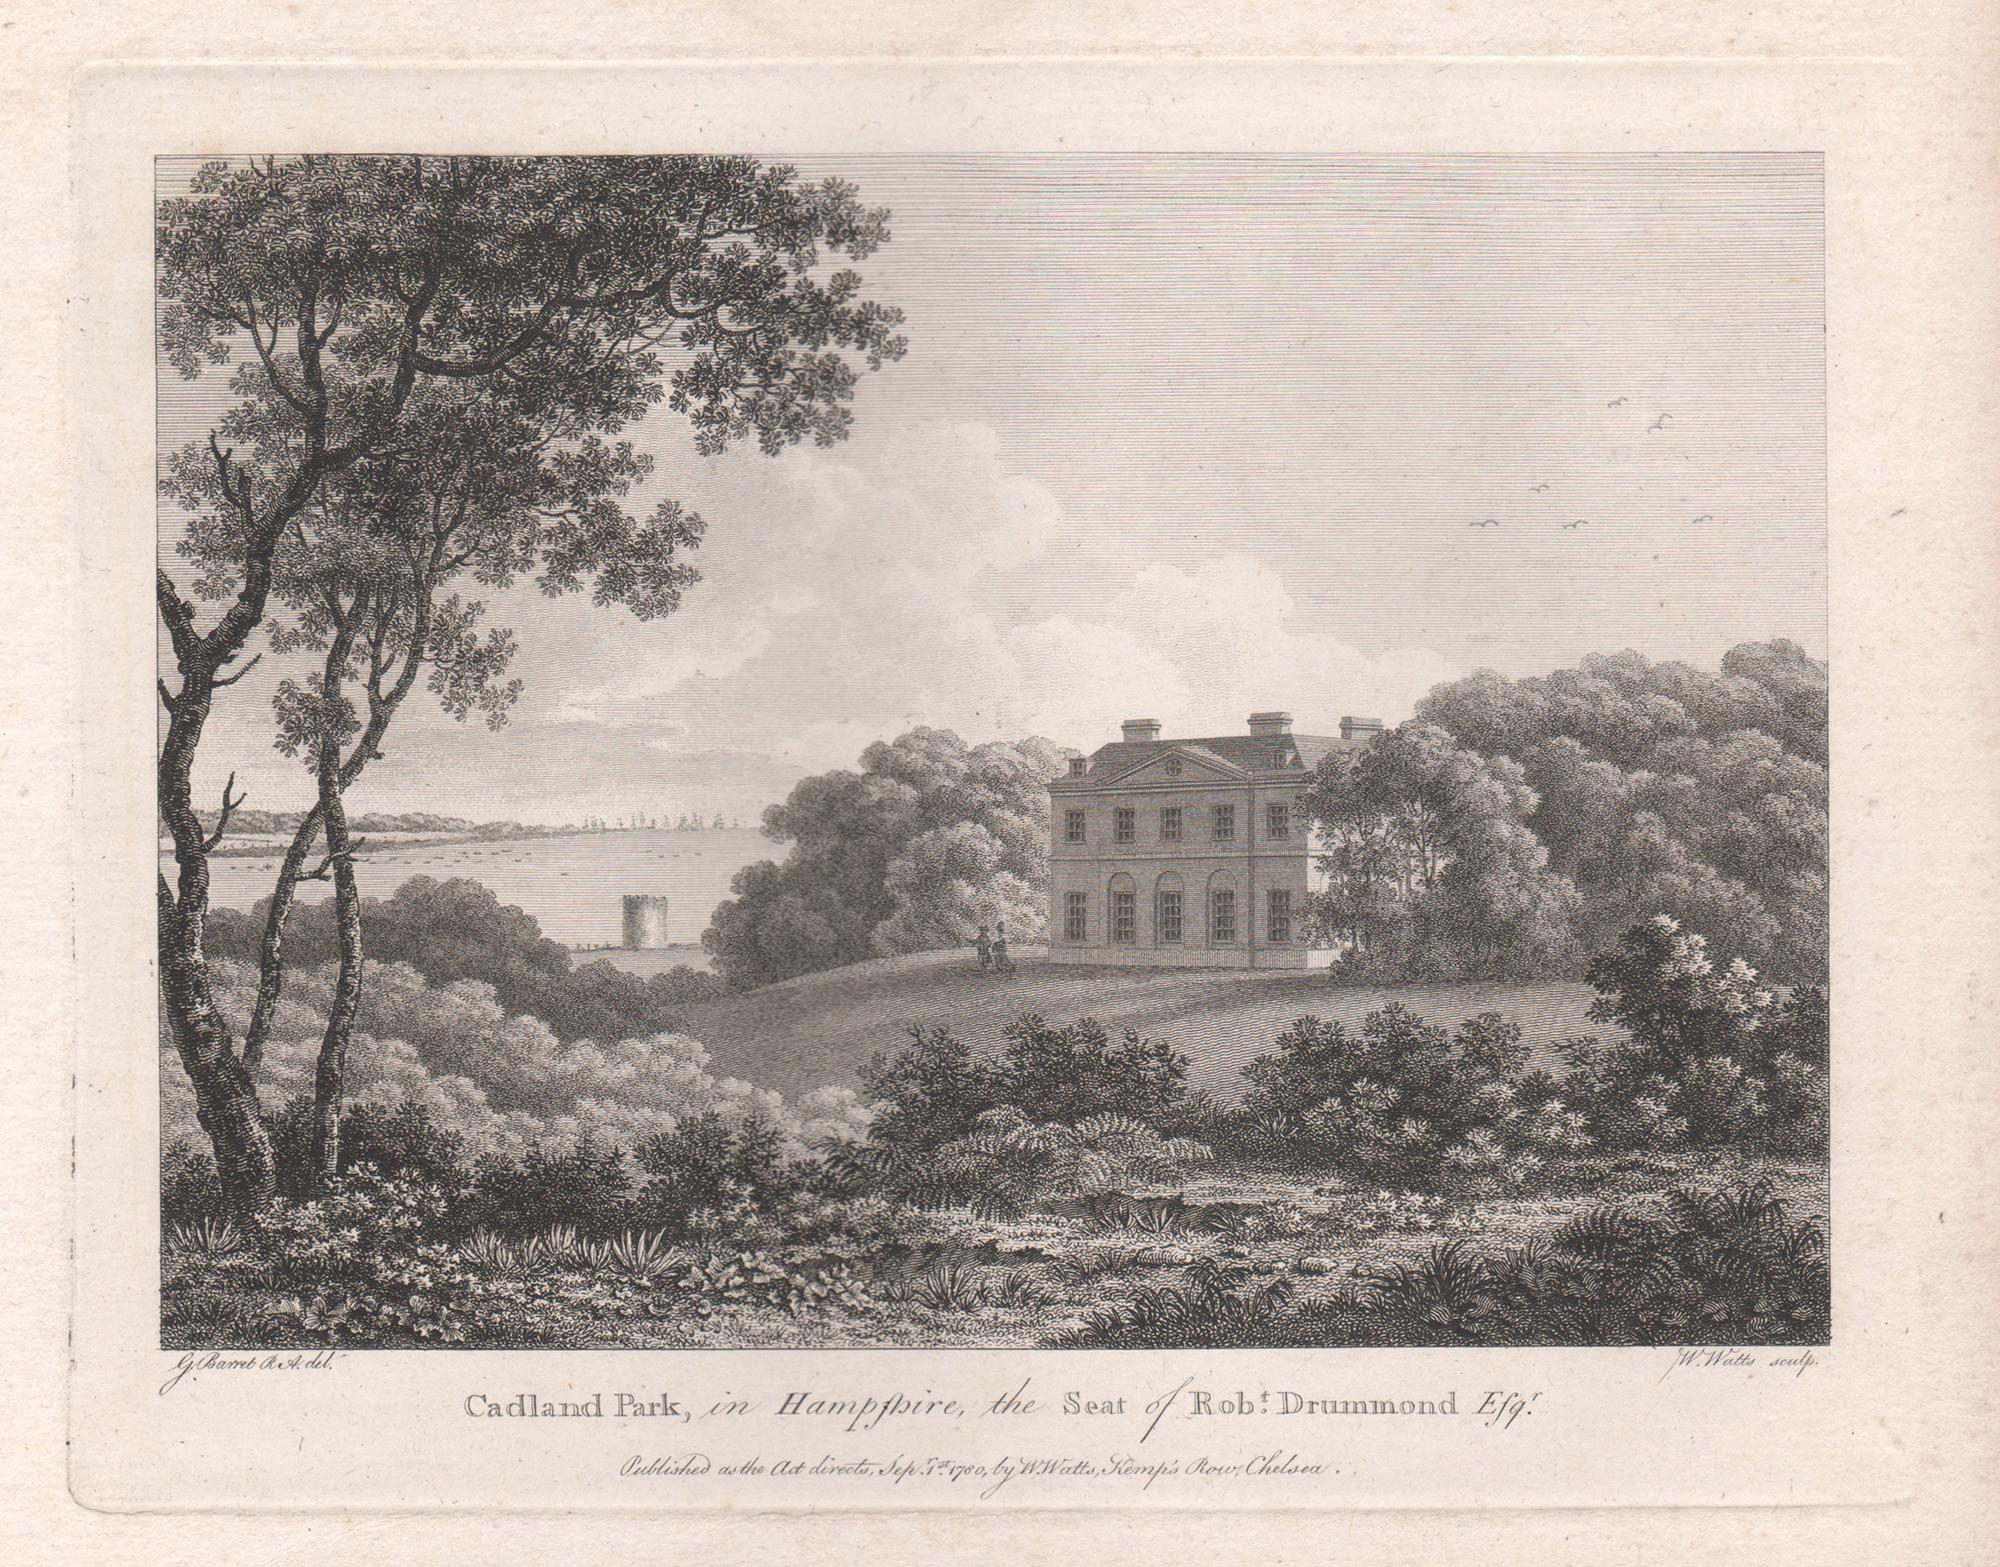 William Watts Landscape Print - Cadland Park in Hampshire, 18th century English country house engraving, 1780